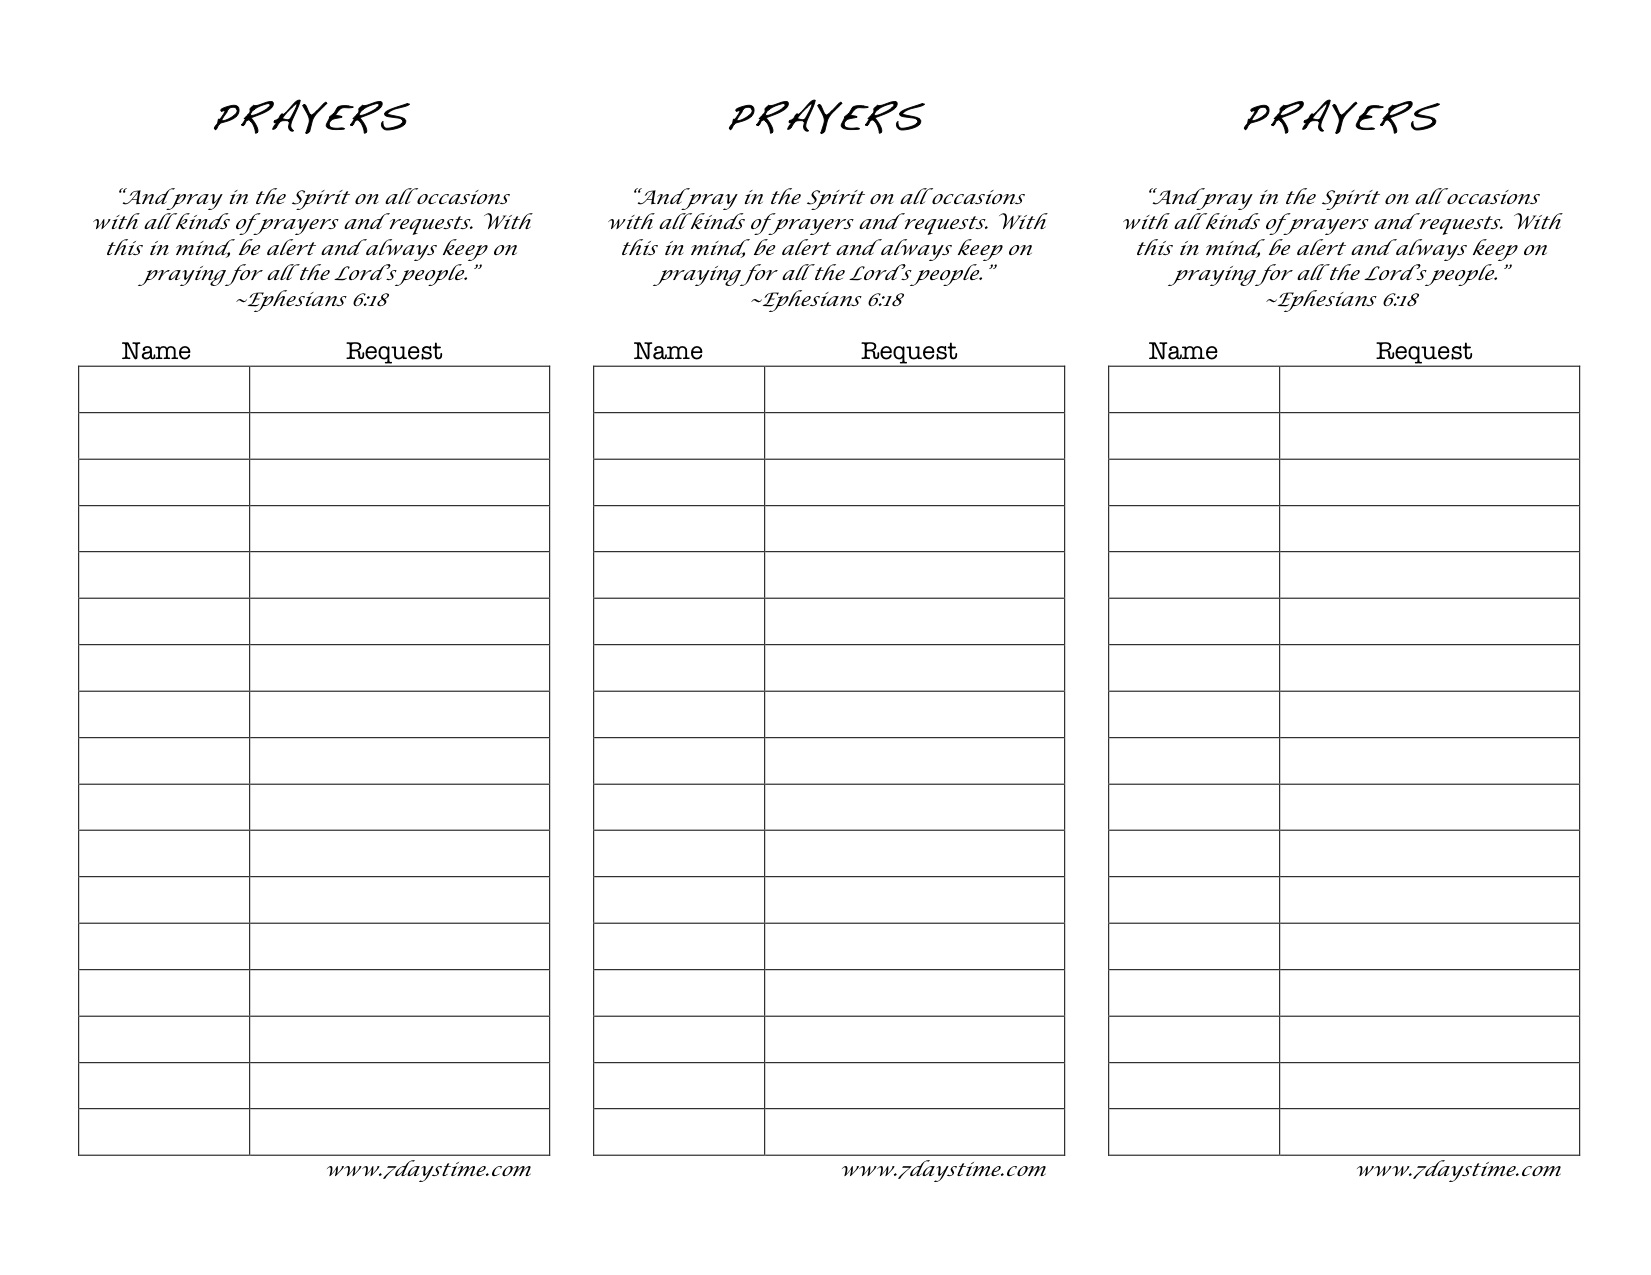 4-best-images-of-free-printable-prayer-request-forms-prayer-request